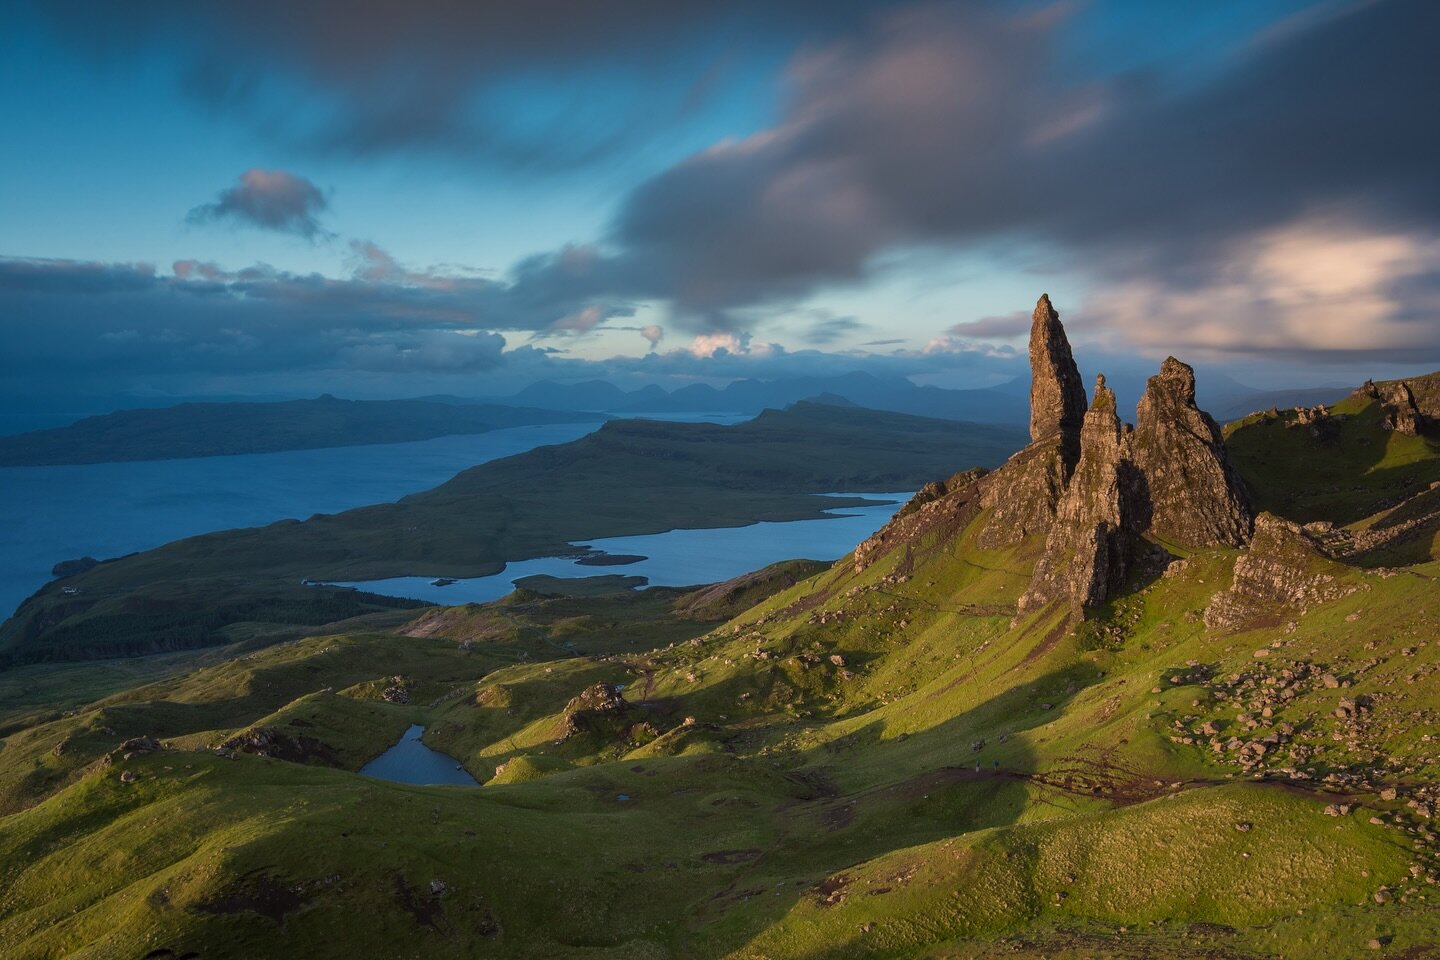 A little throwback morning magic at the Old Man of Storr. Scotland&rsquo;s beauty never ceases to amaze! 🌅✨ #IsleOfSkye #ScottishSunrise #oldmanofstorr